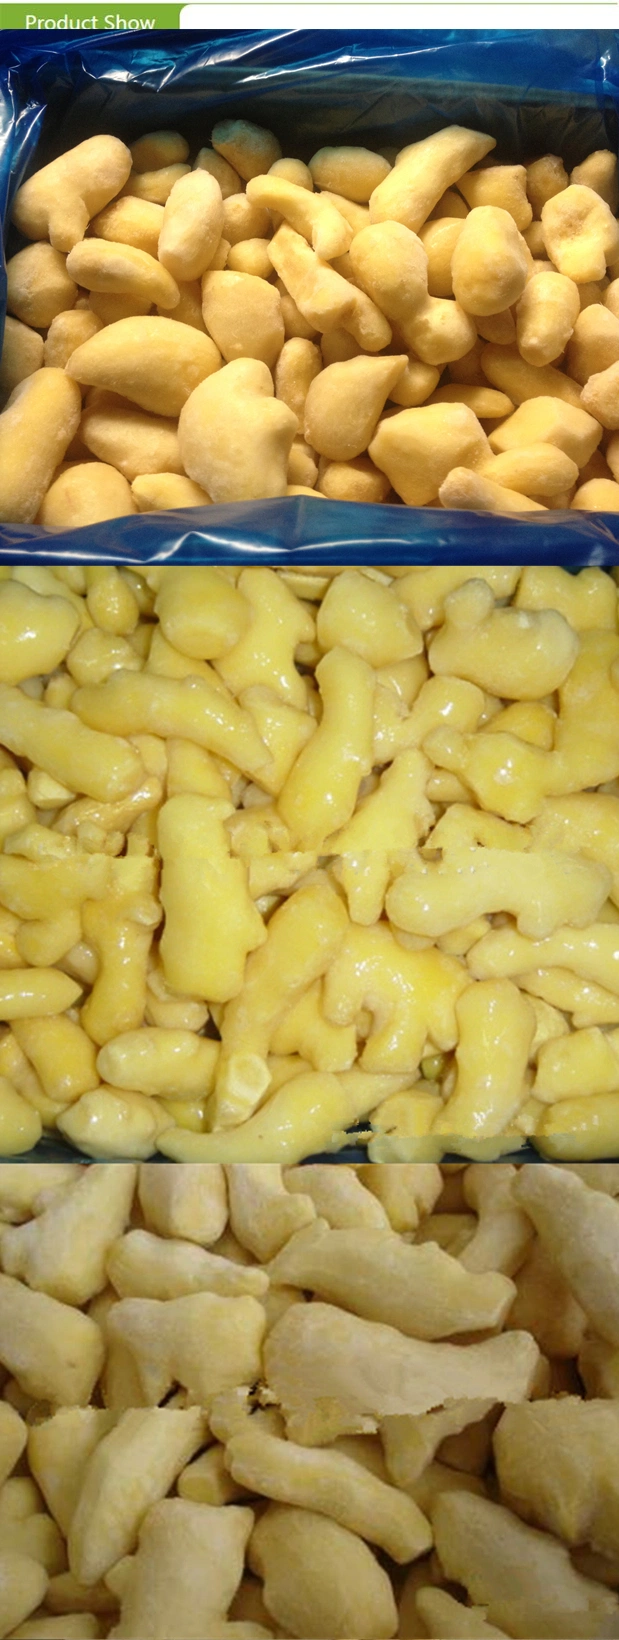 New Crop Chinese Frozen Peeled Ginger